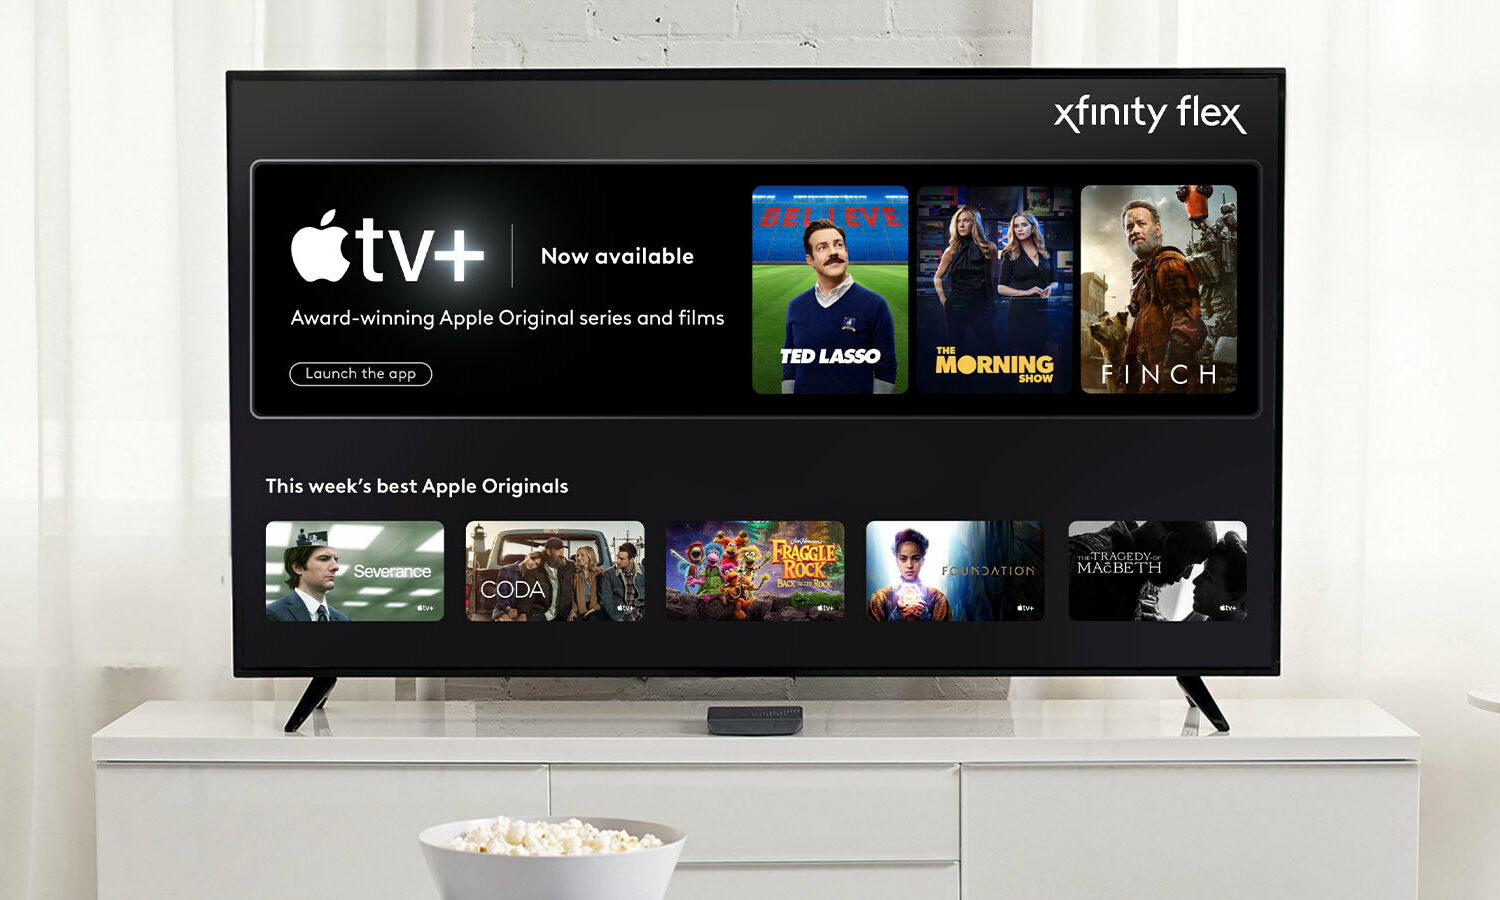 Marketing image showcasing the official Apple TV+ app from Comcast on Xfinity X1